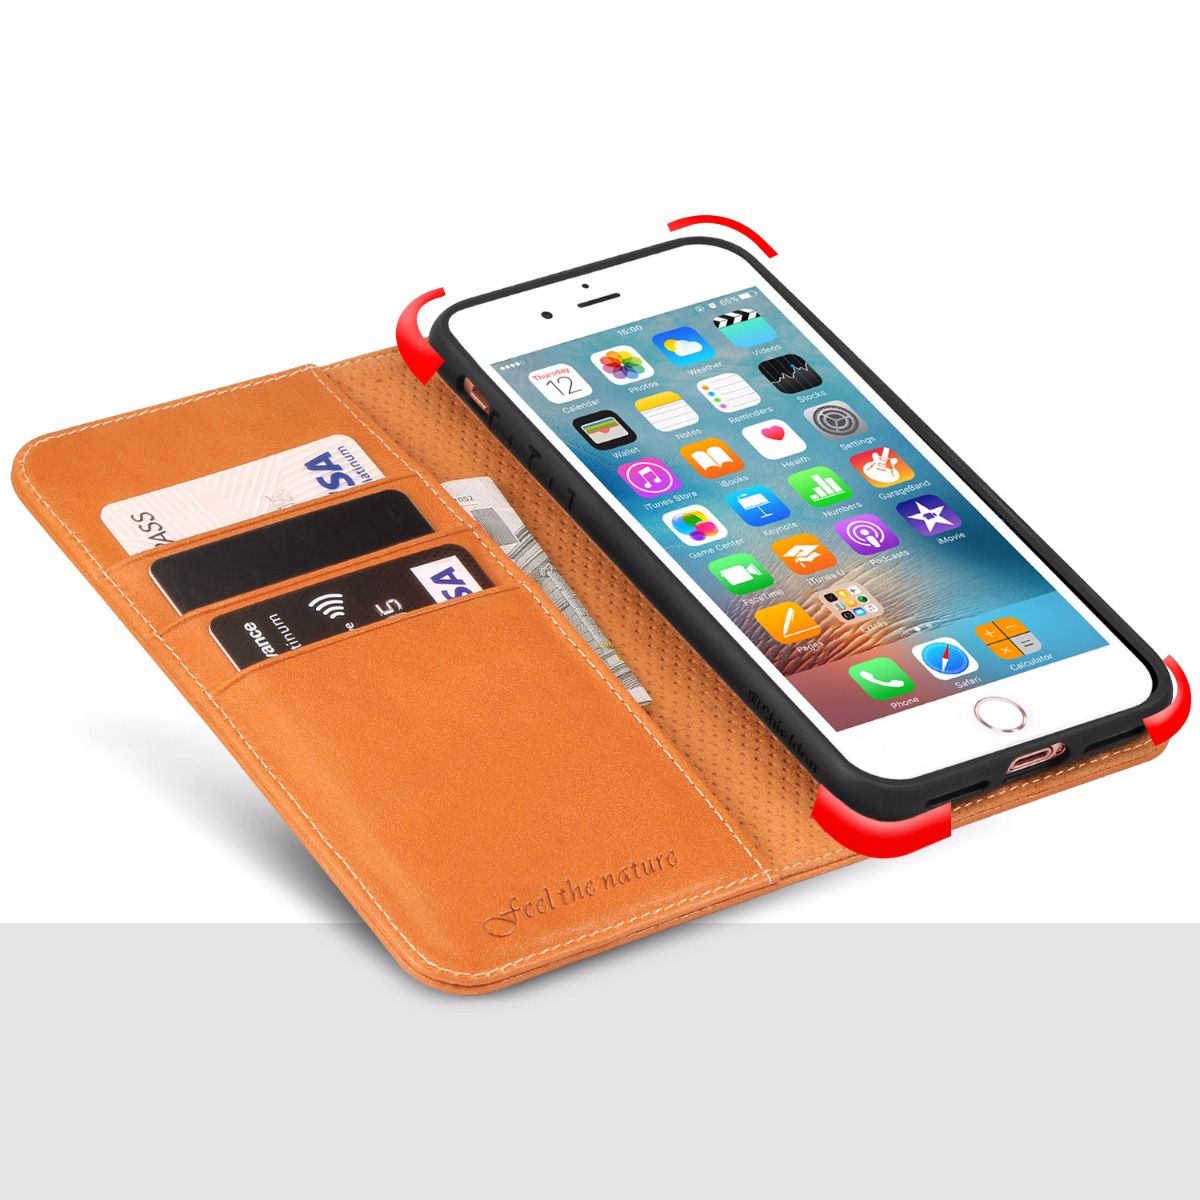 Cover for iPhone 8 Plus Leather Kickstand Wallet Cover Card Holders Extra-Protective Business with Free Waterproof-Bag Classical iPhone 8 Plus Flip Case 